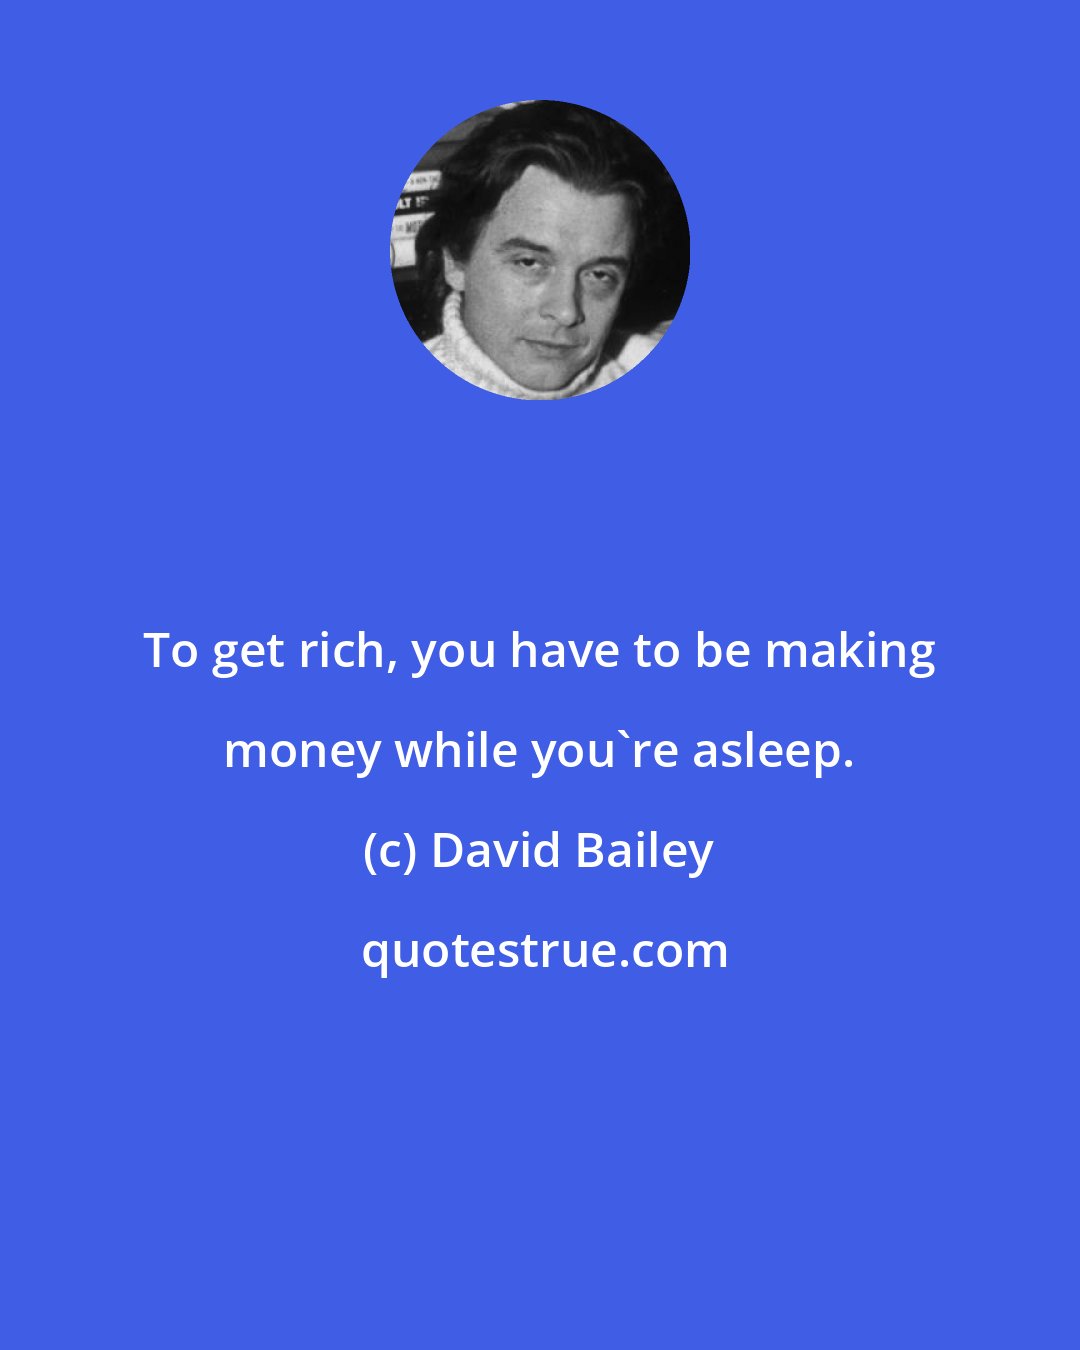 David Bailey: To get rich, you have to be making money while you're asleep.